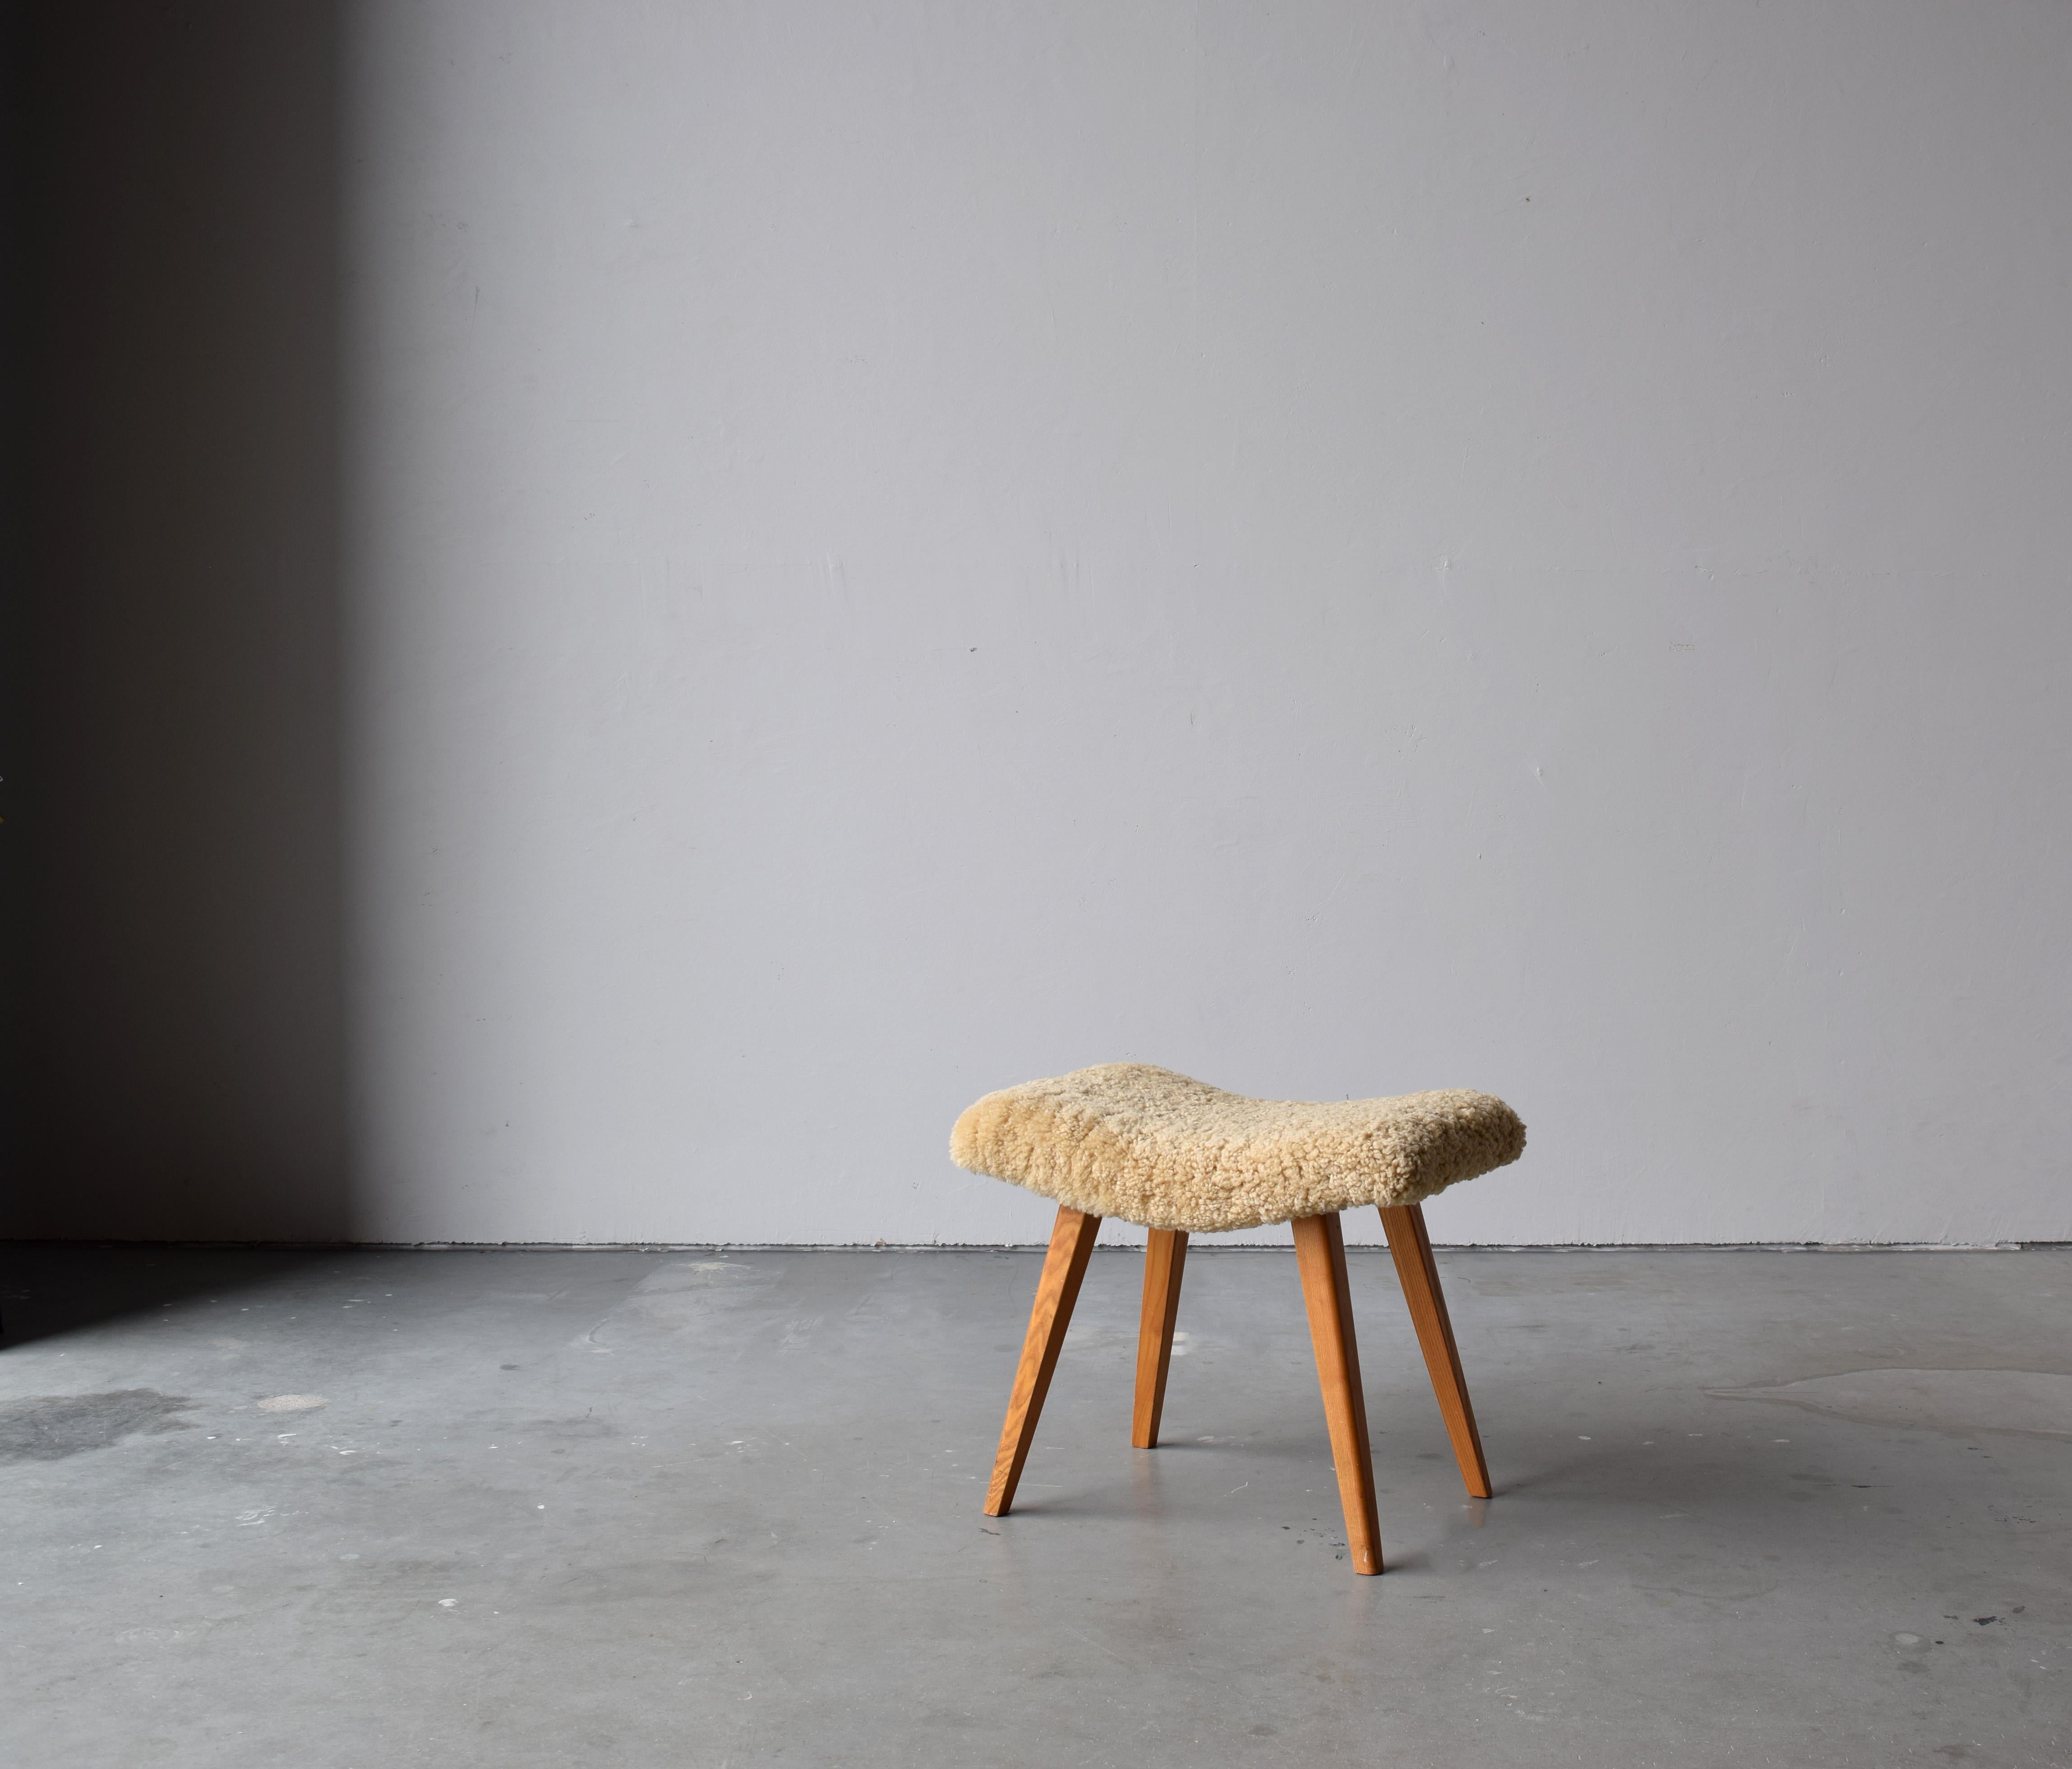 An organic stool in stained wood, overstuffed seat reupholstered in brand new sheepskin upholstery. Produced in Sweden, 1950s.

Other designers of the period include Finn Juhl, Hans Wegner, Isamu Noguchi, Charlotte Perriand.